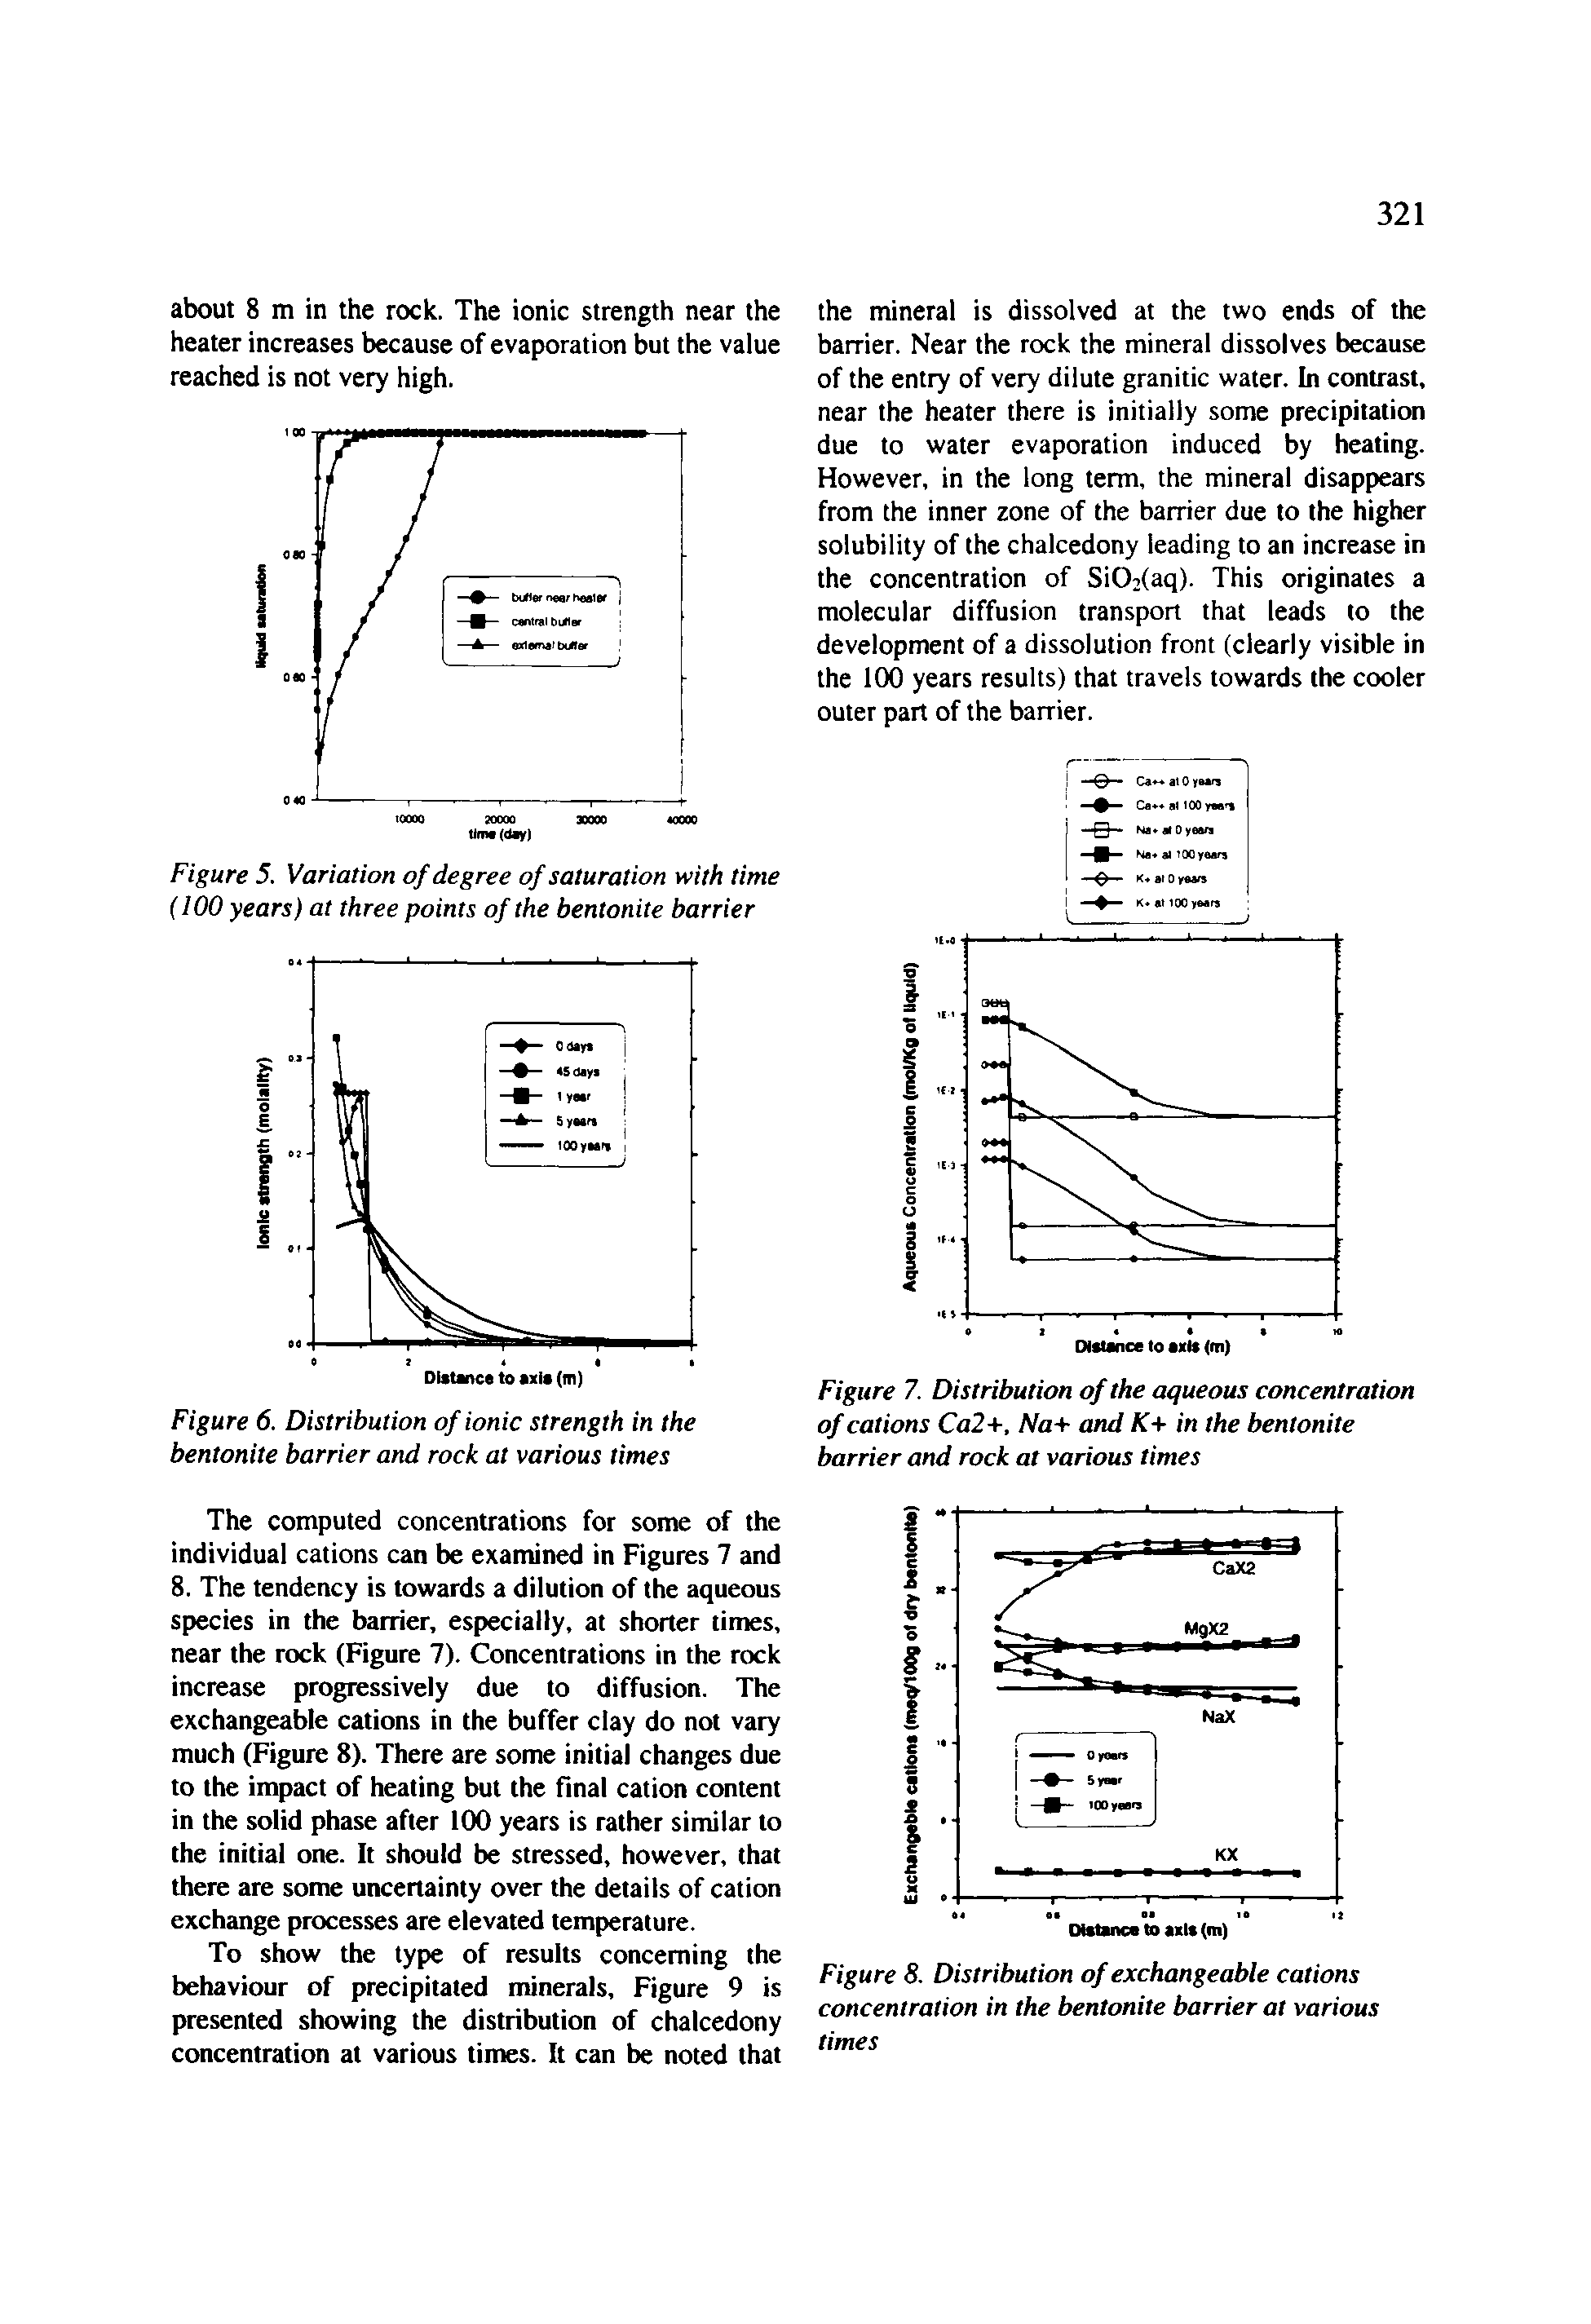 Figure 8. Distribution of exchangeable cations concentration in the bentonite barrier at various times...